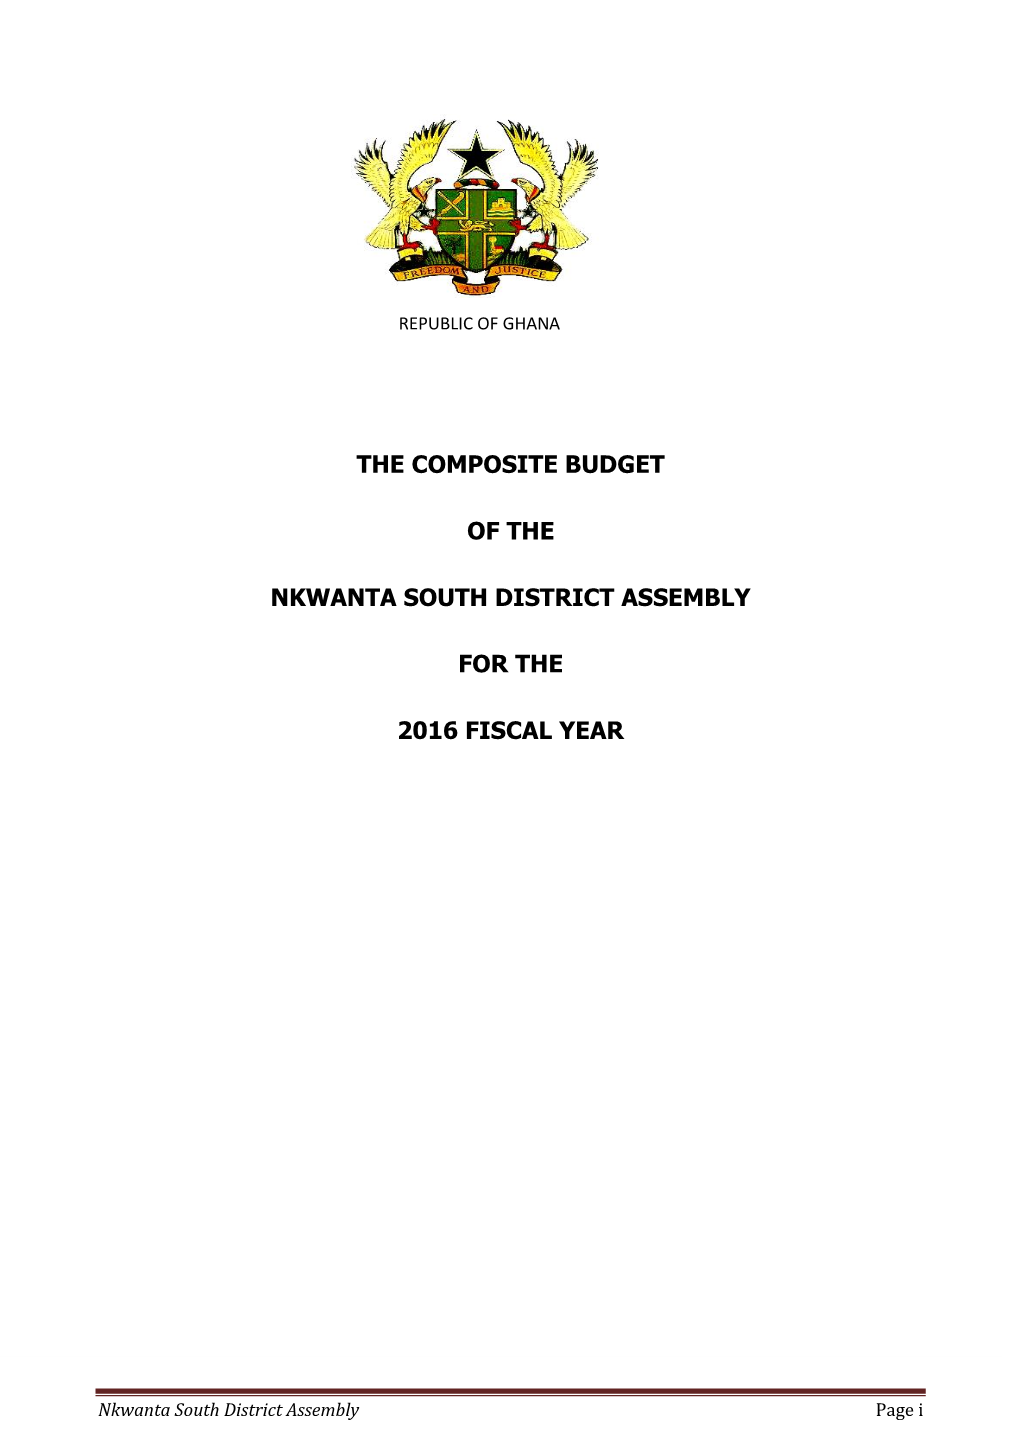 The Composite Budget of the Nkwanta South District Assembly for the 2016